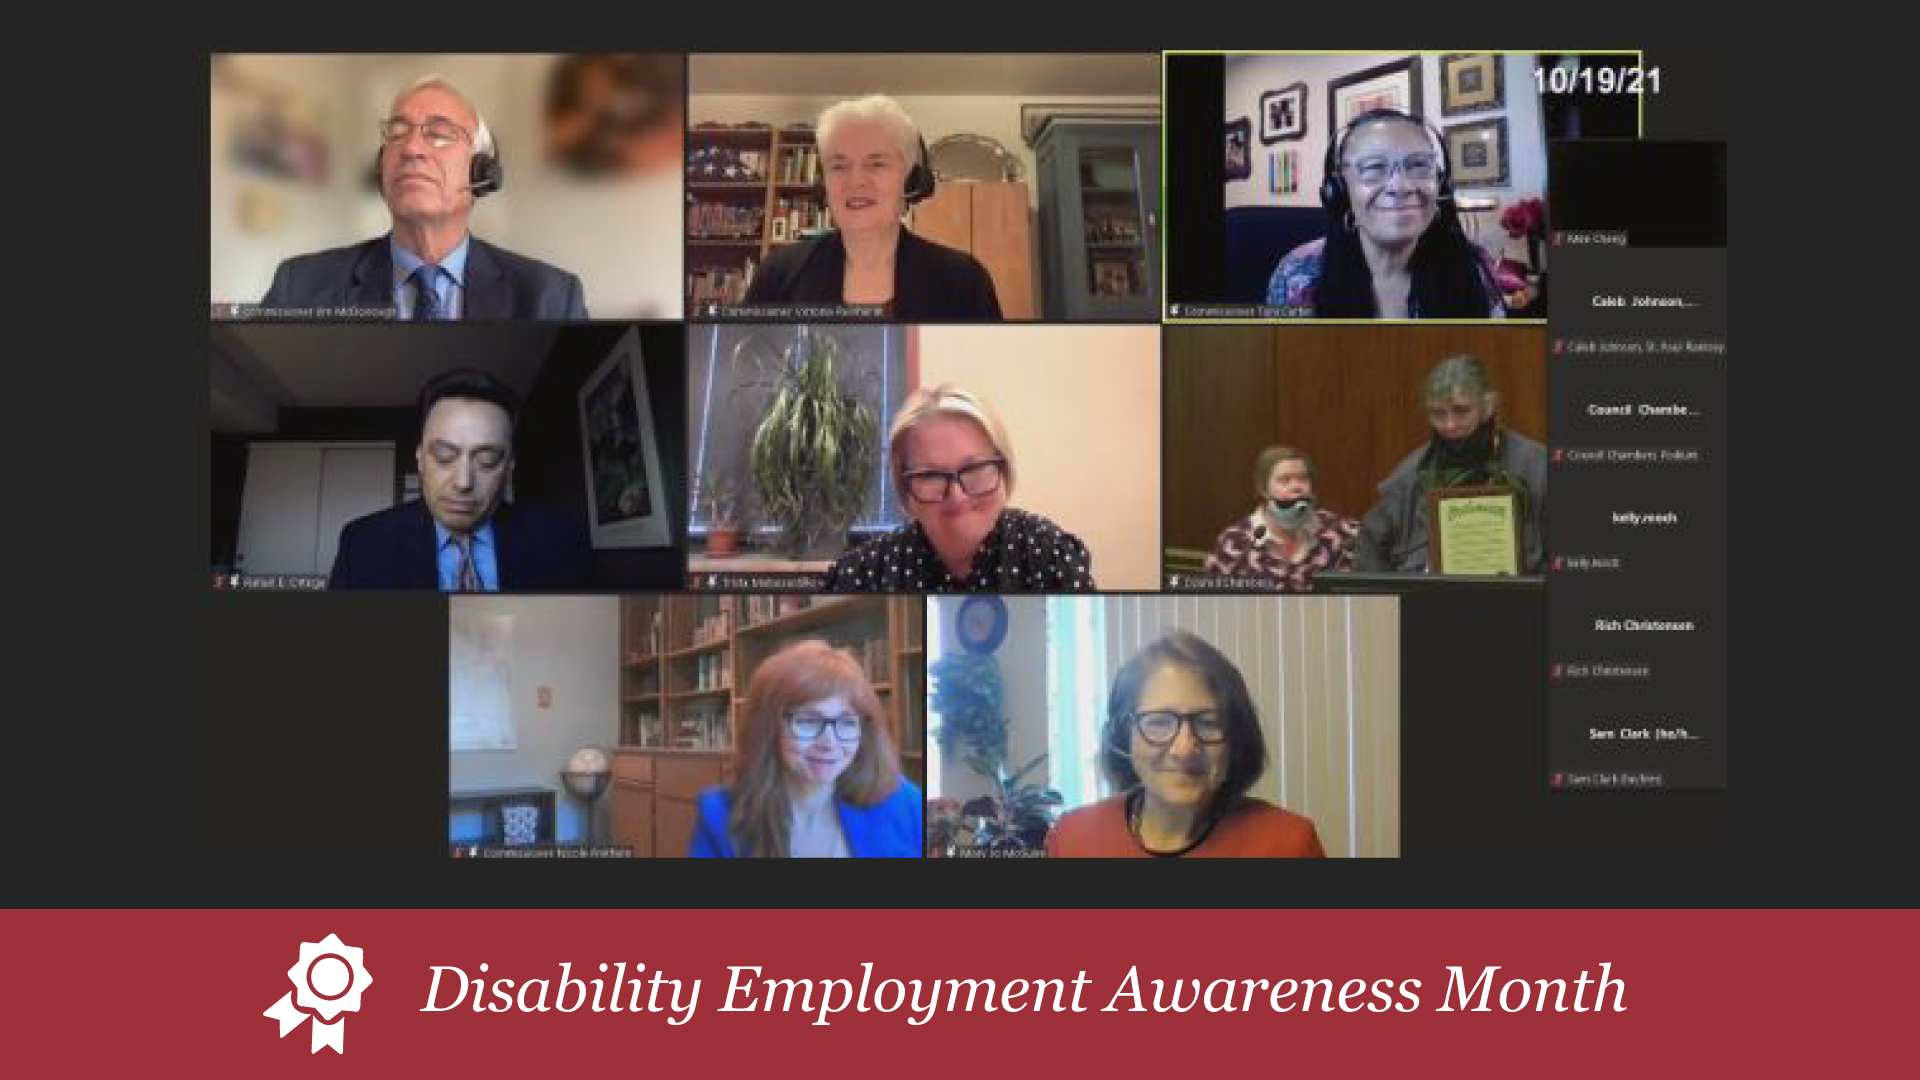 Disability Employment Awareness Month proclamation